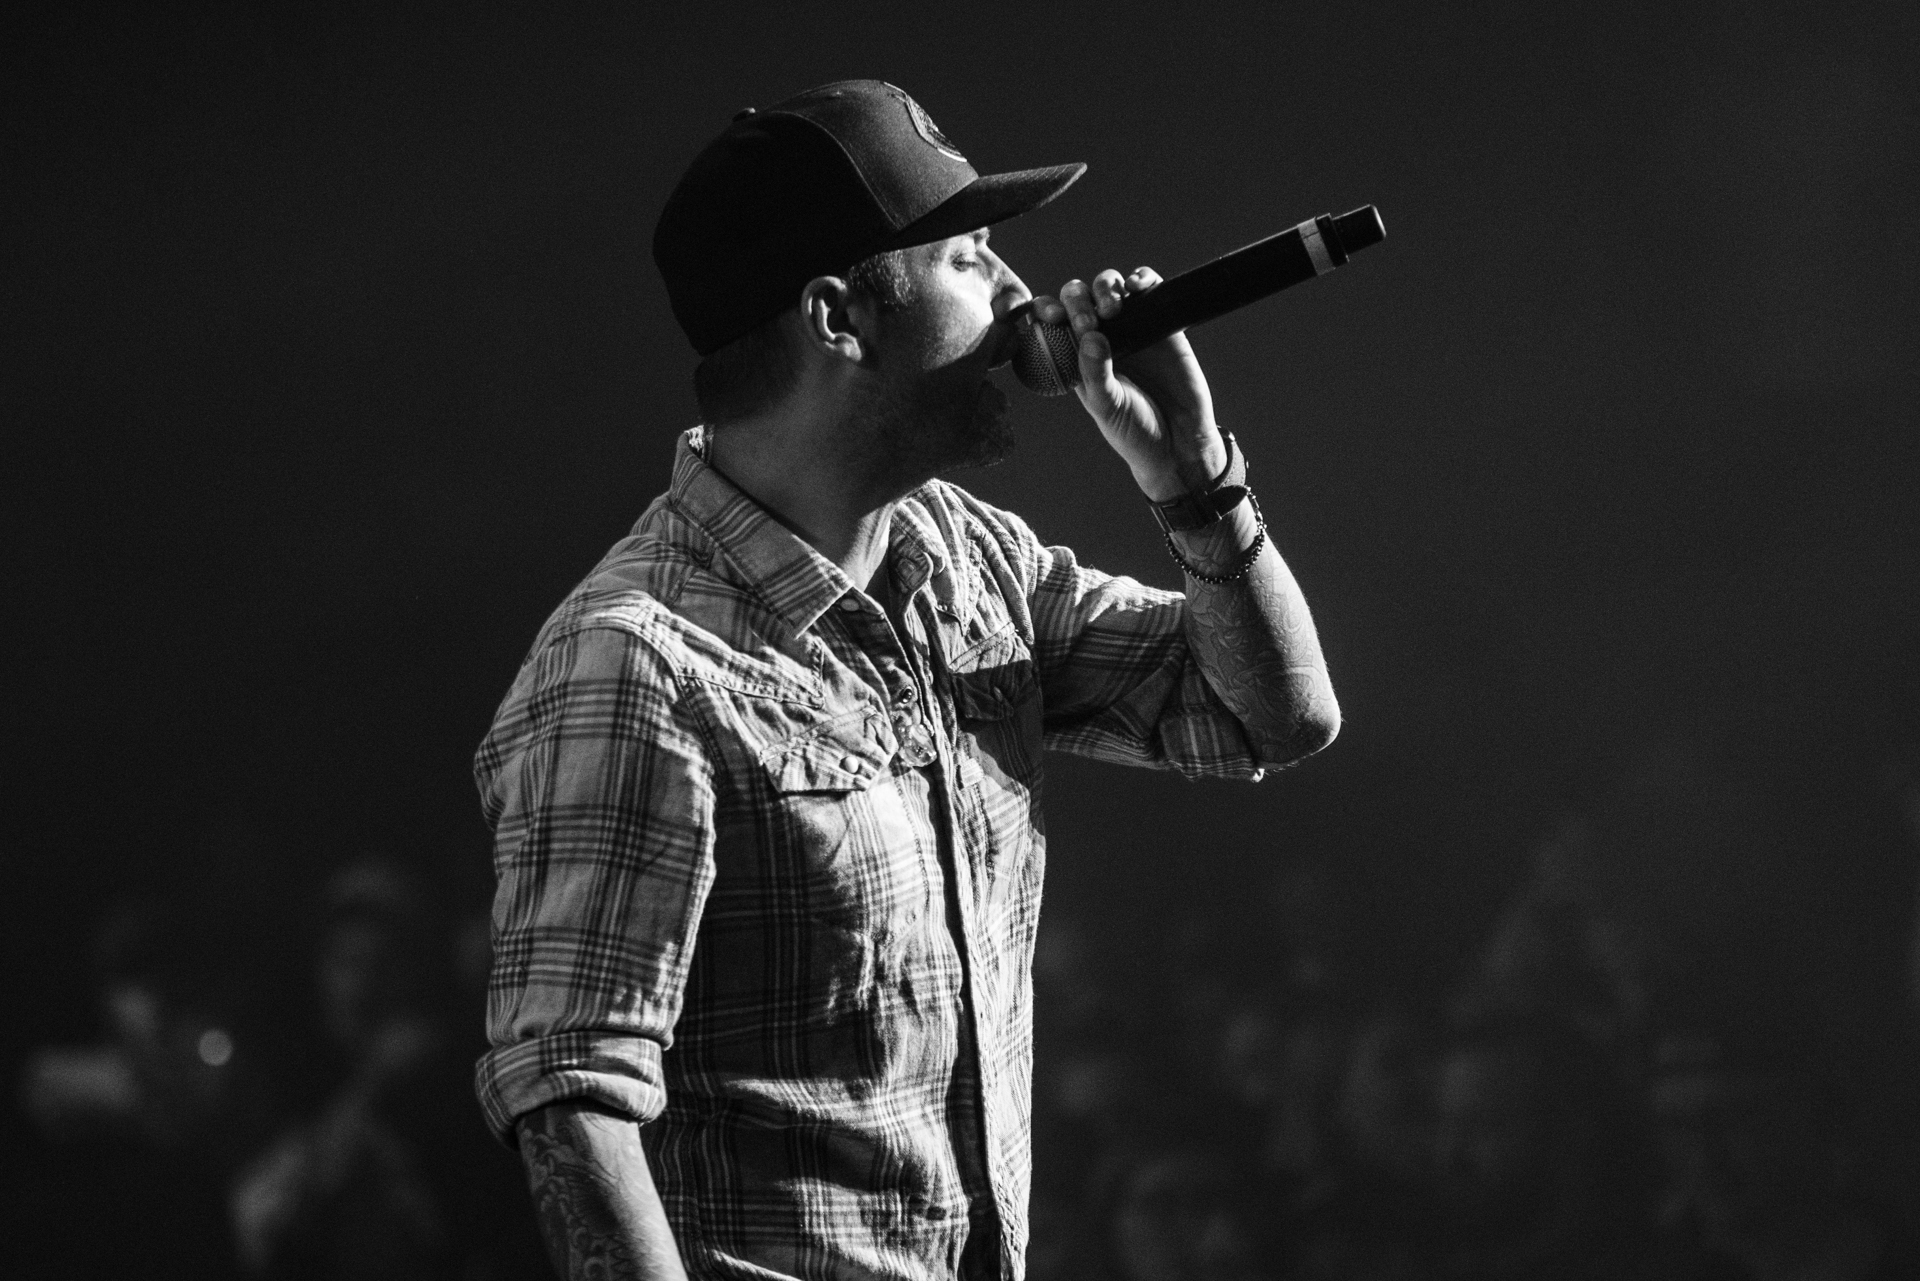 In a captivating black and white photo, Dallas Smith is captured in a side profile, pouring his soul into the microphone. The audience in the background adds depth to the image, illustrating the connection between the artist and the engaged crowd.